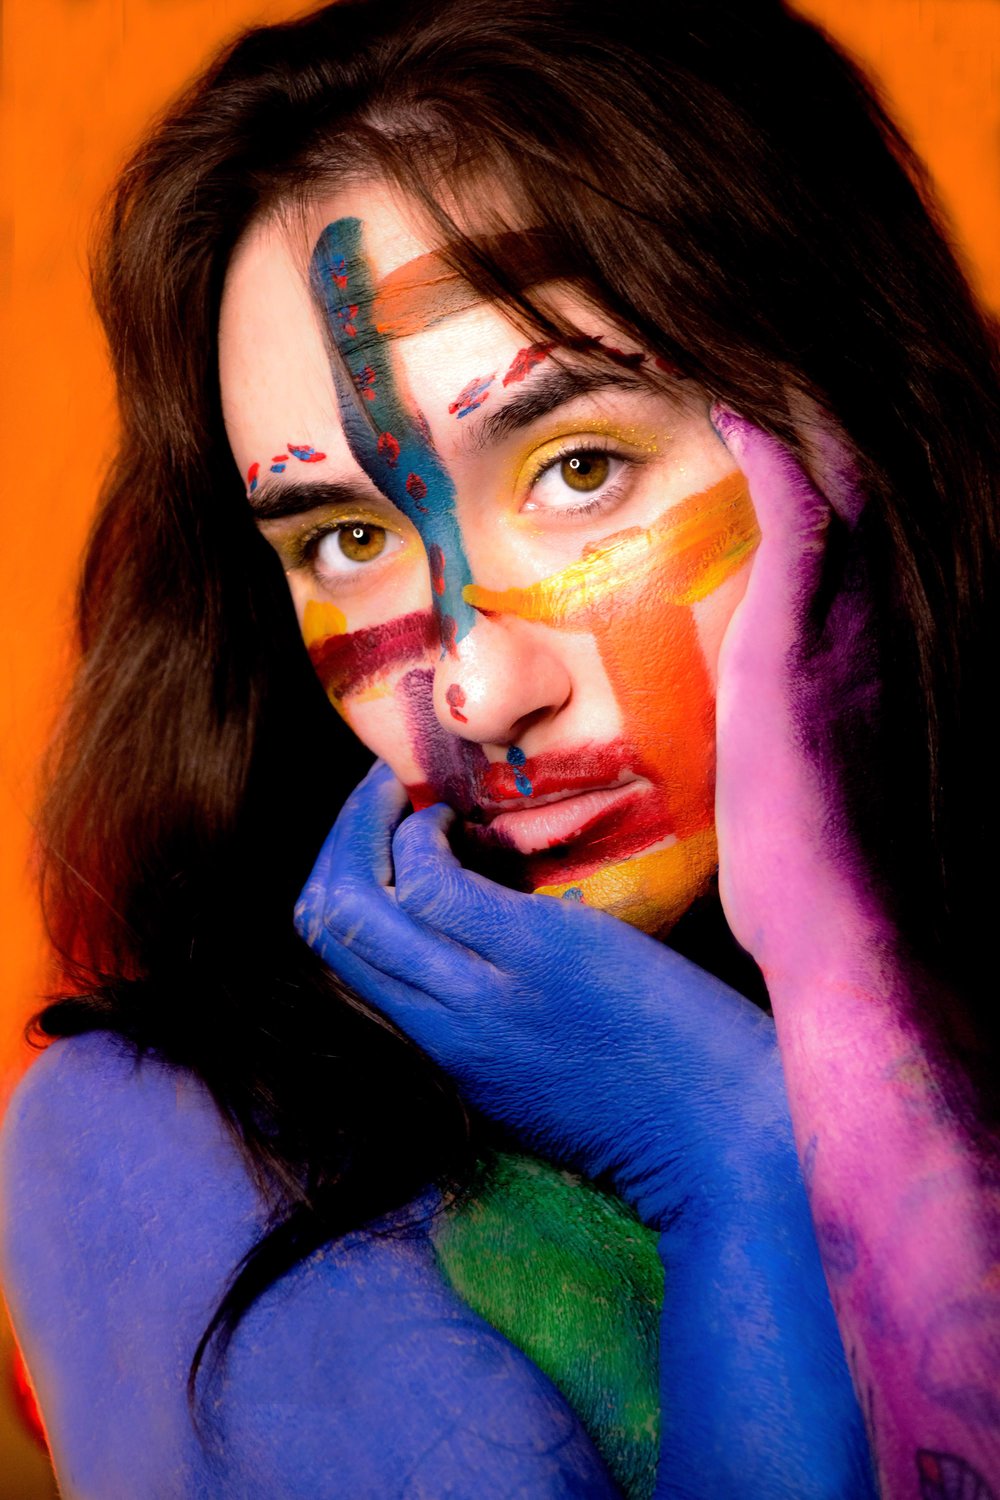 Photograph of Painted Woman by Lauryn Garrison.